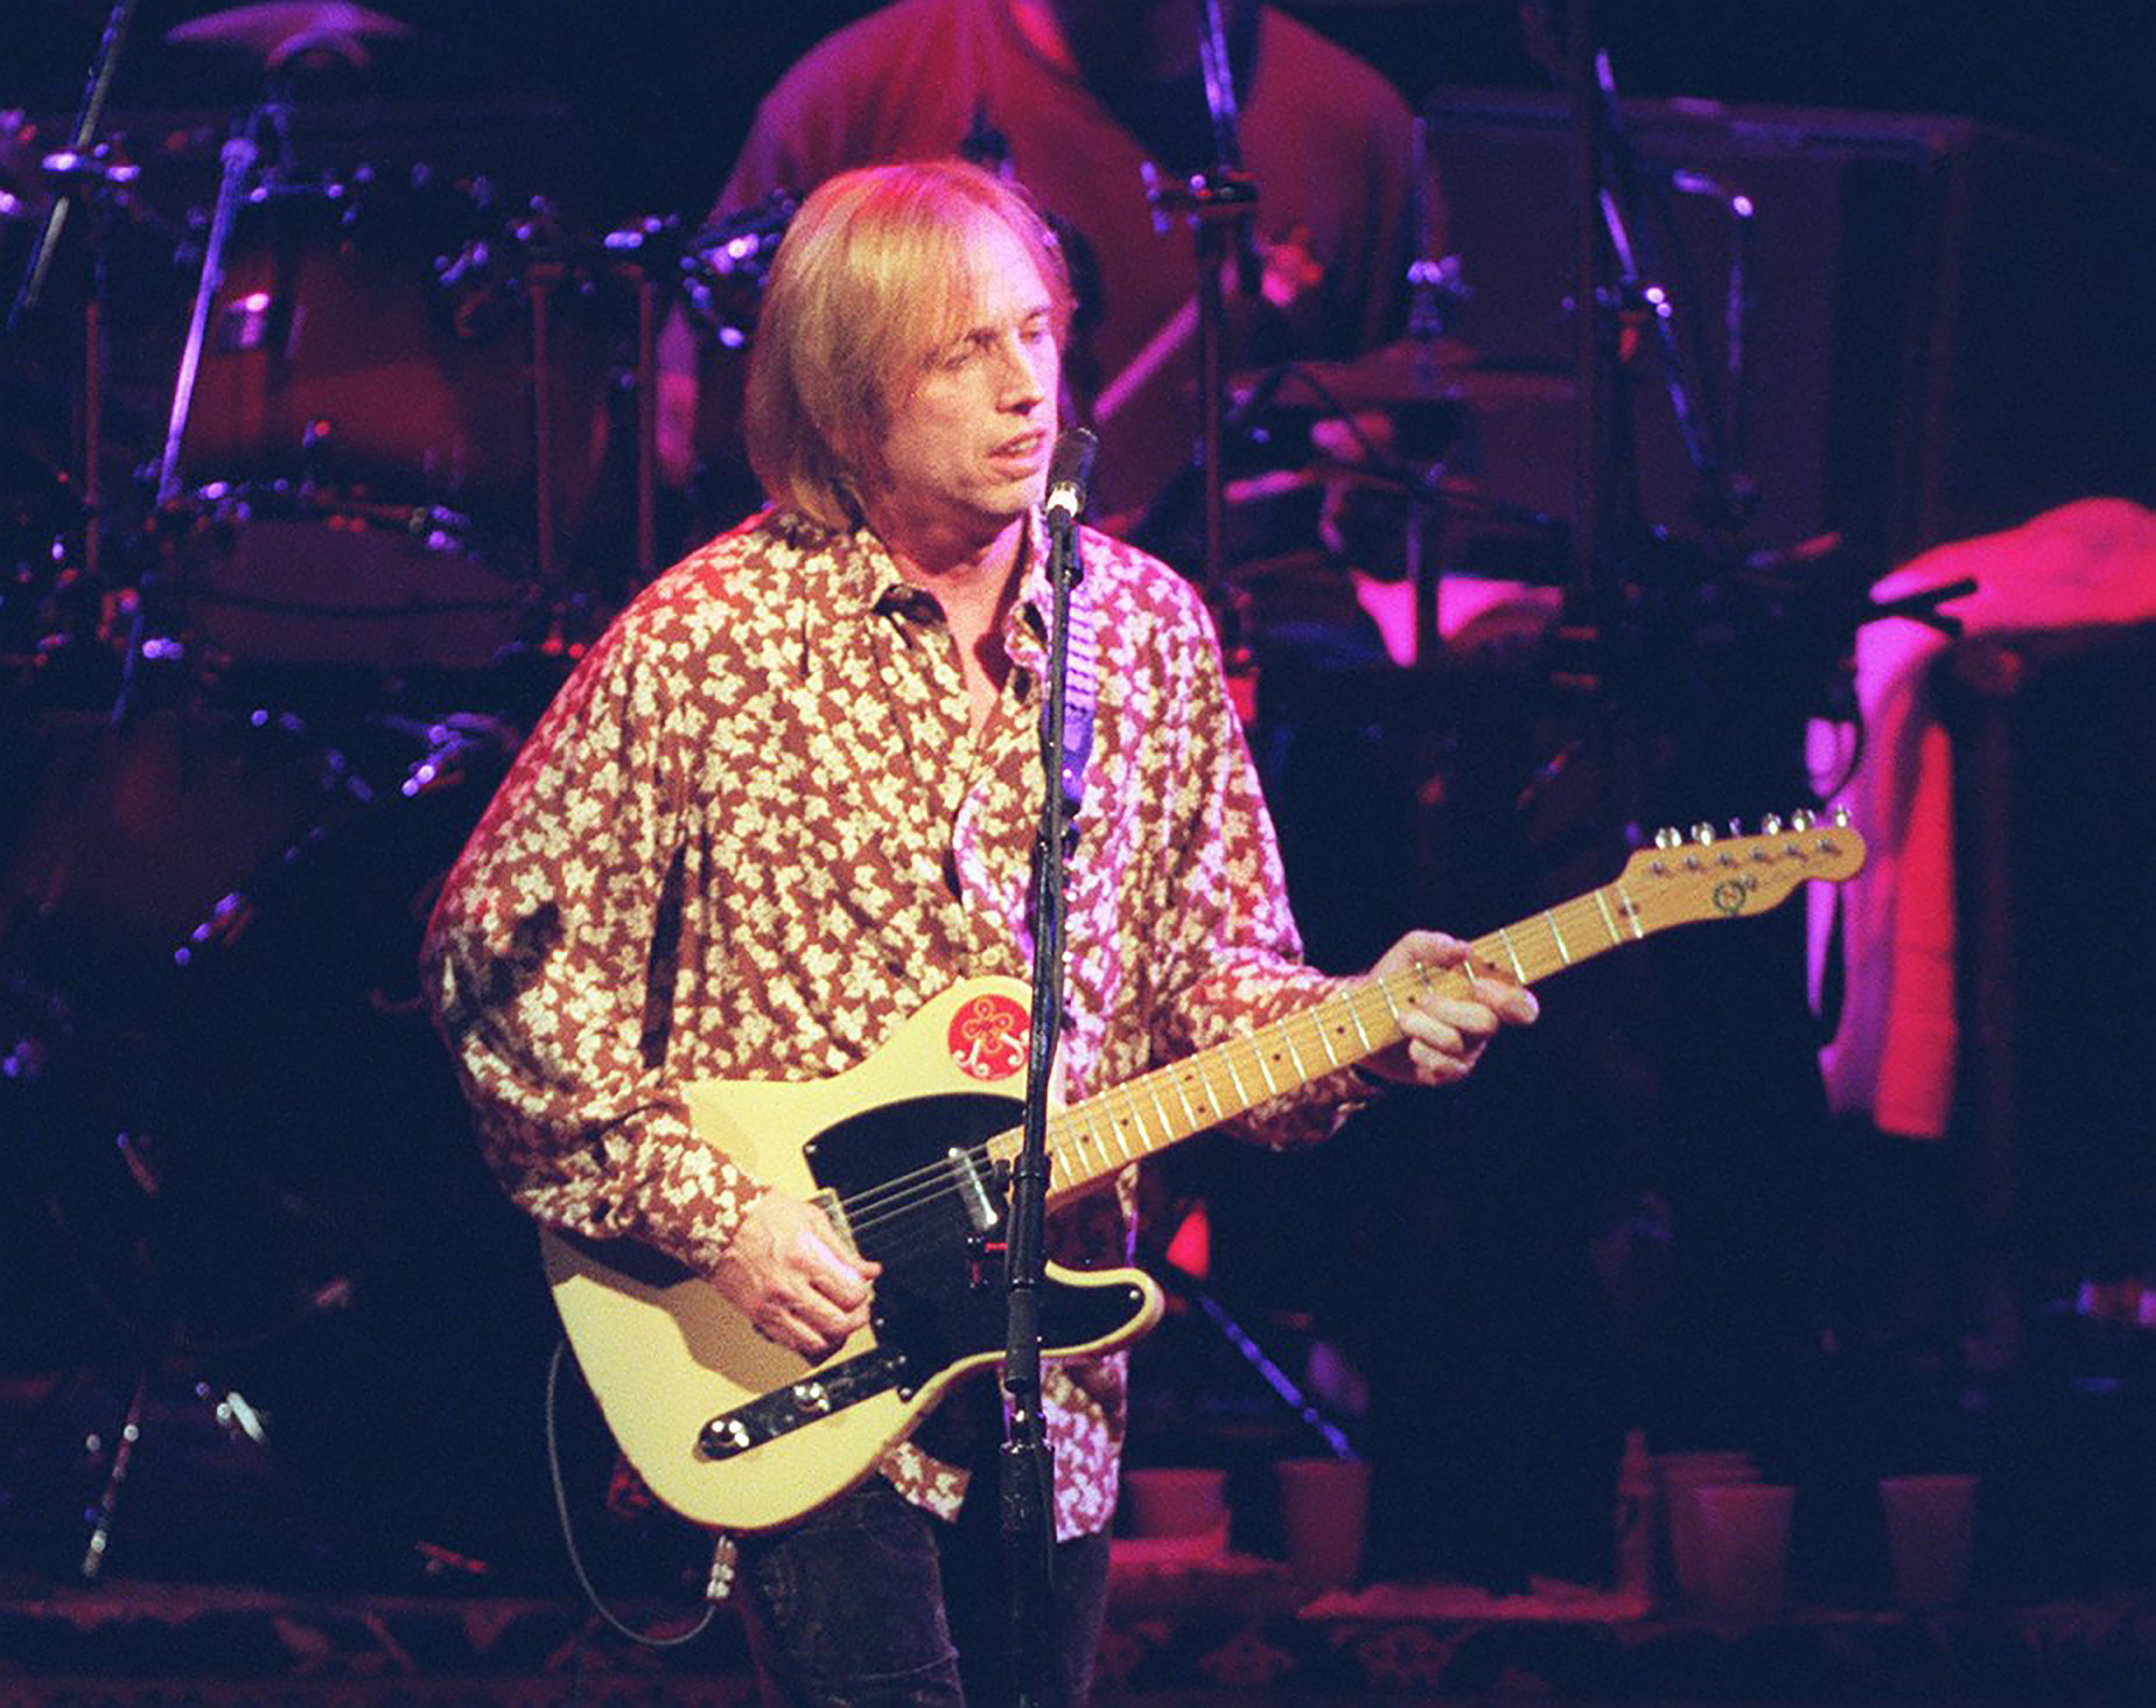 Tom Petty performing in a concert